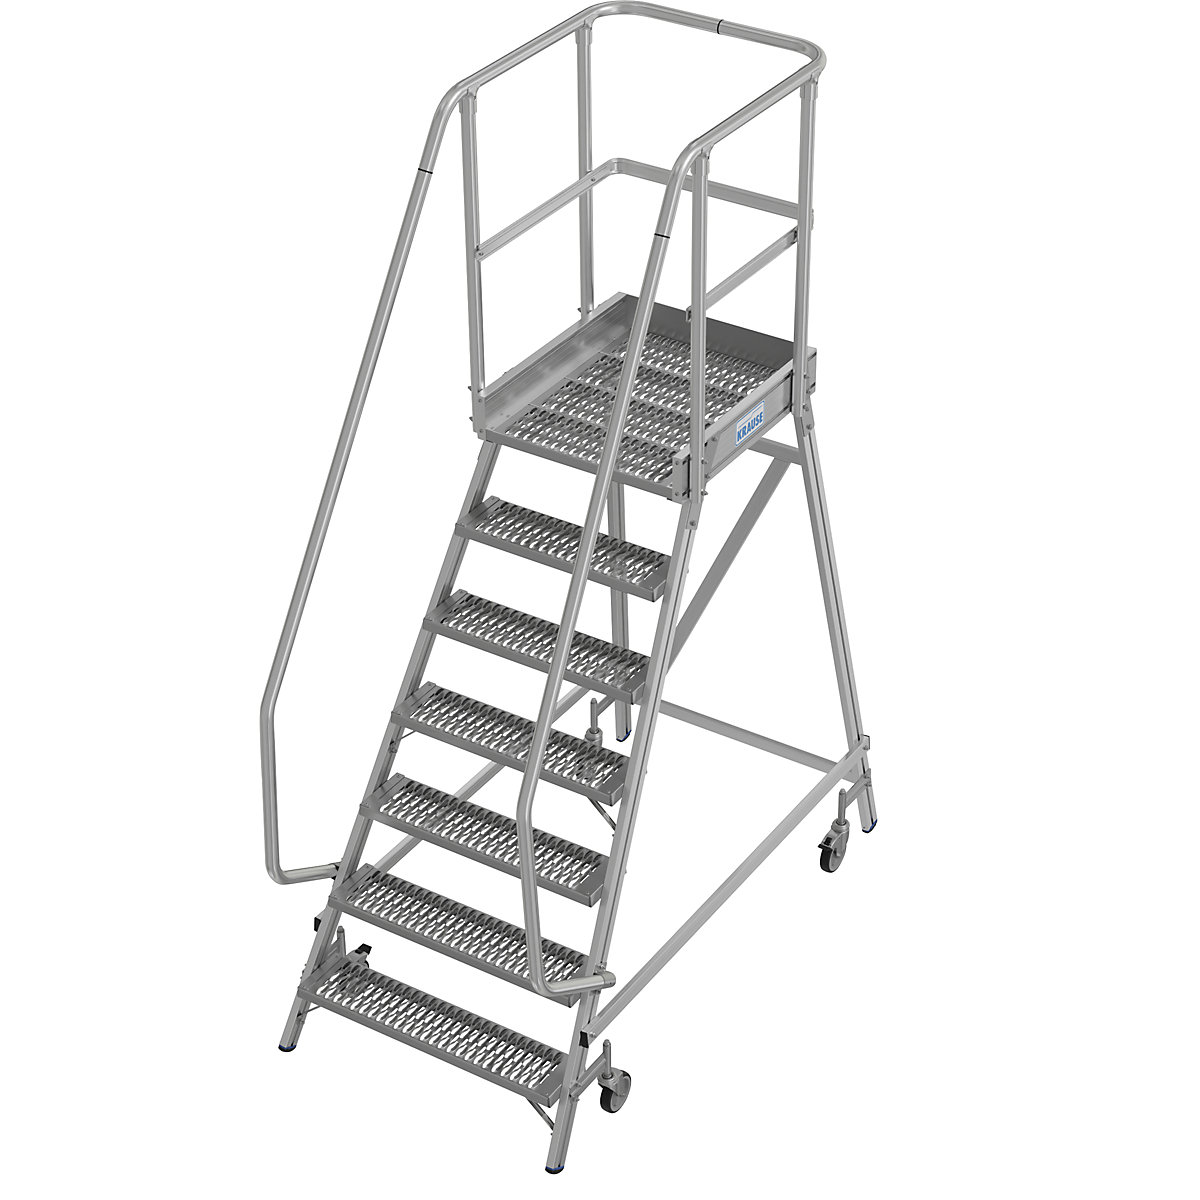 Mobile safety steps with R13 anti-slip properties – KRAUSE, with single sided access, 7 steps incl. platform-6